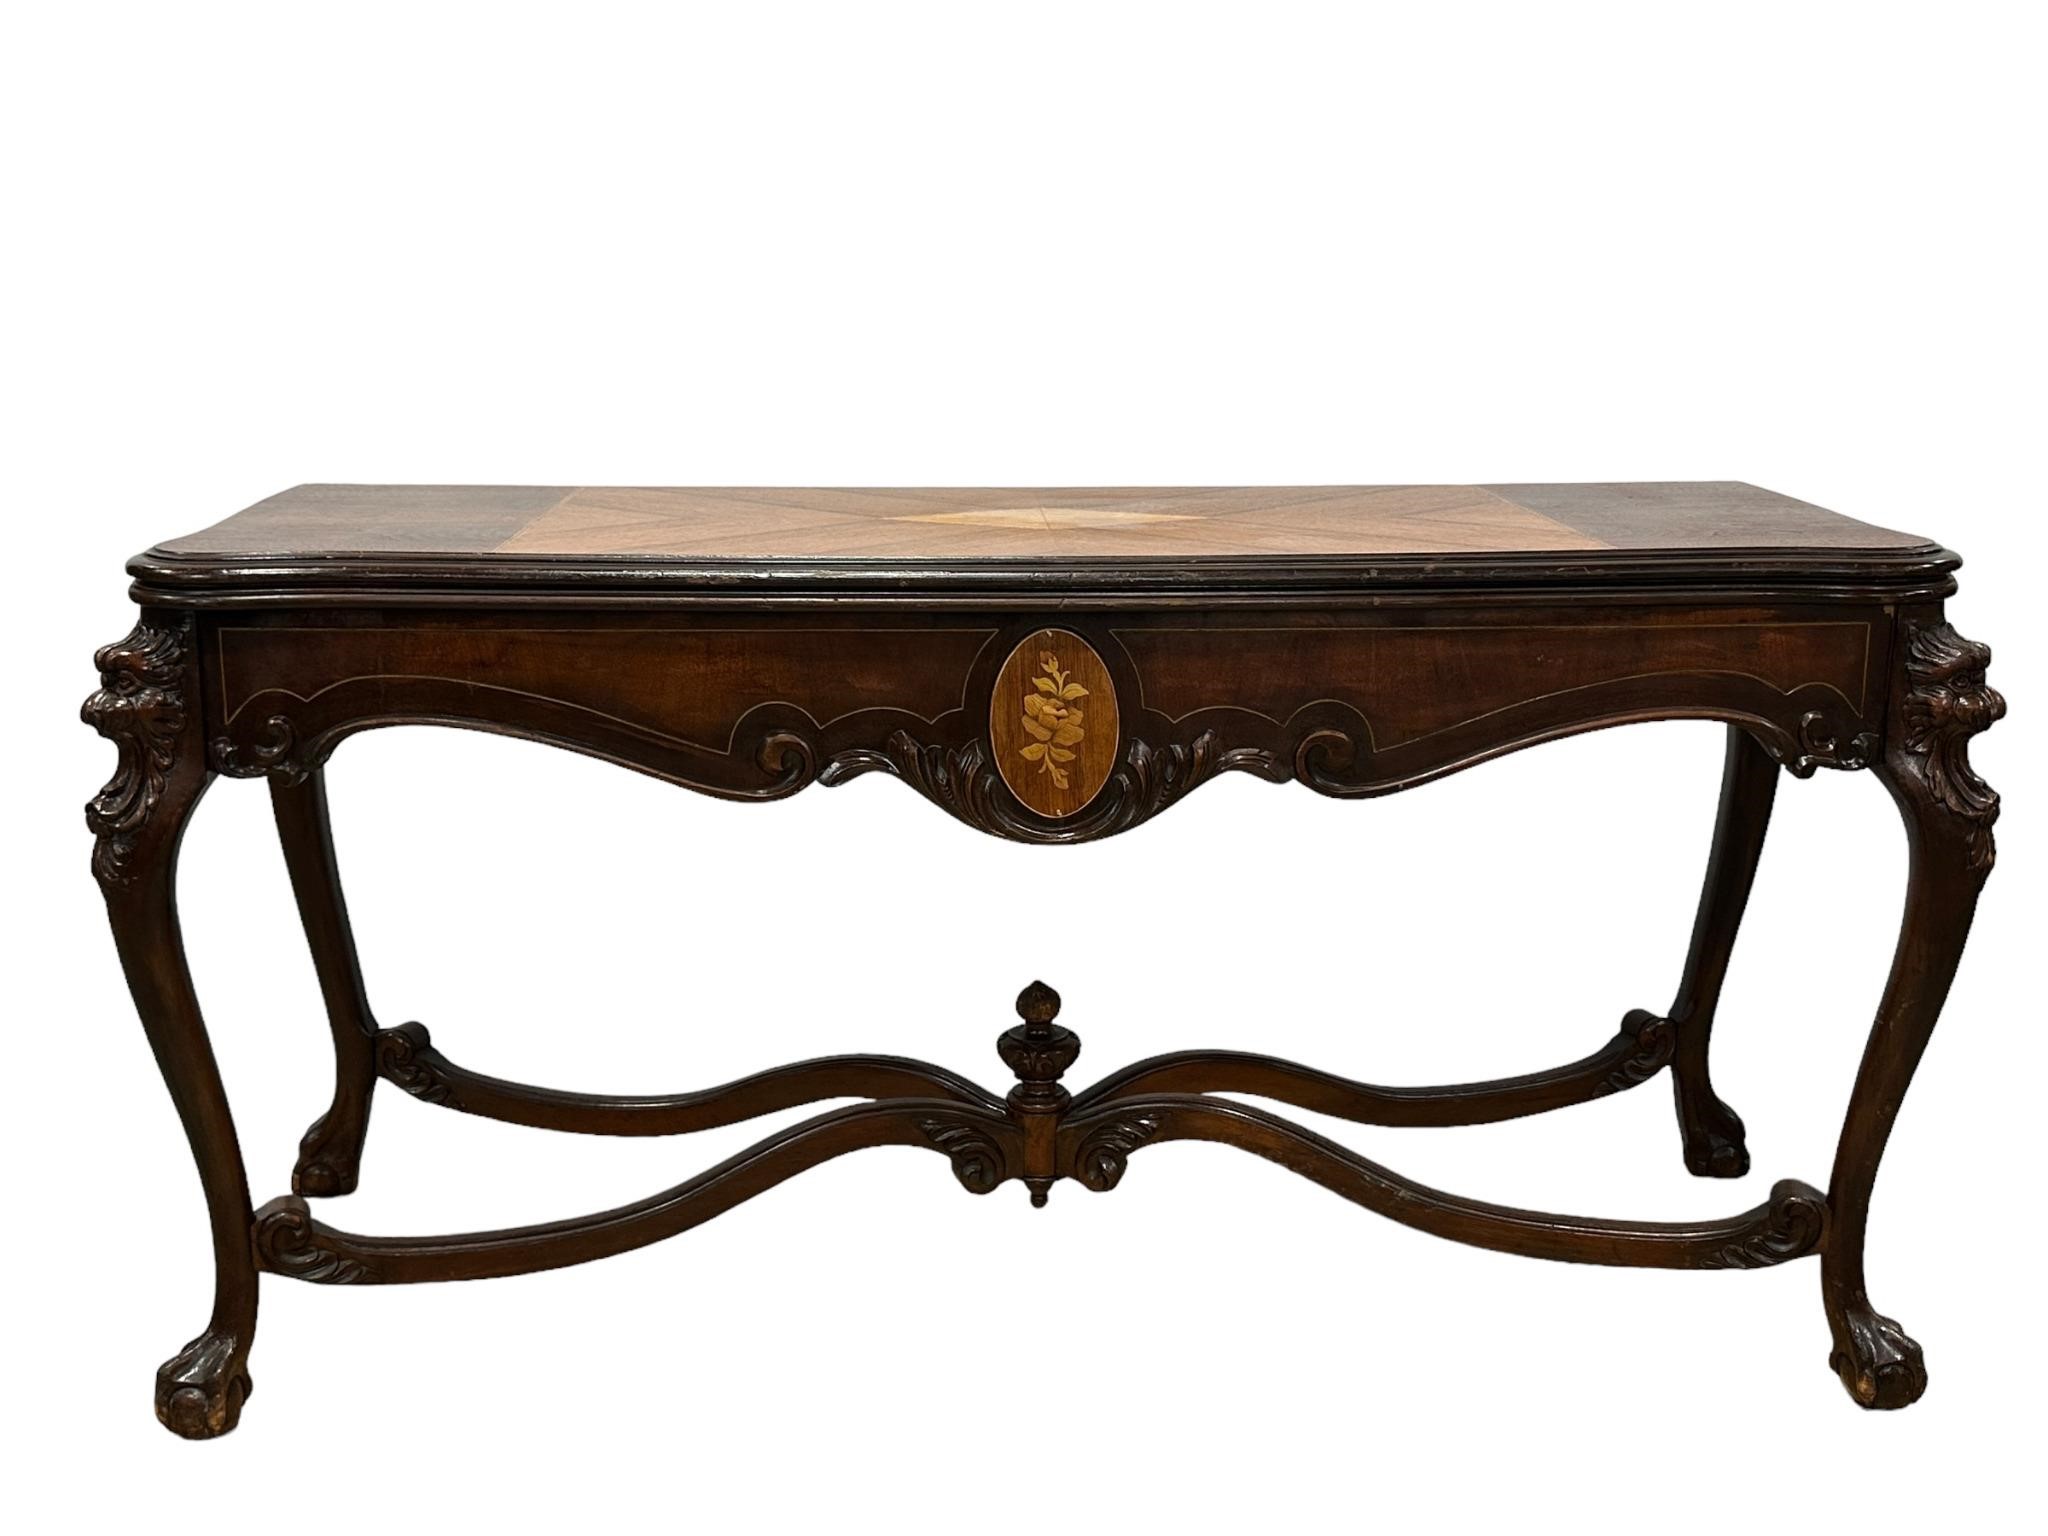 Victorian Wood Carved Inlaid Folding Console Table